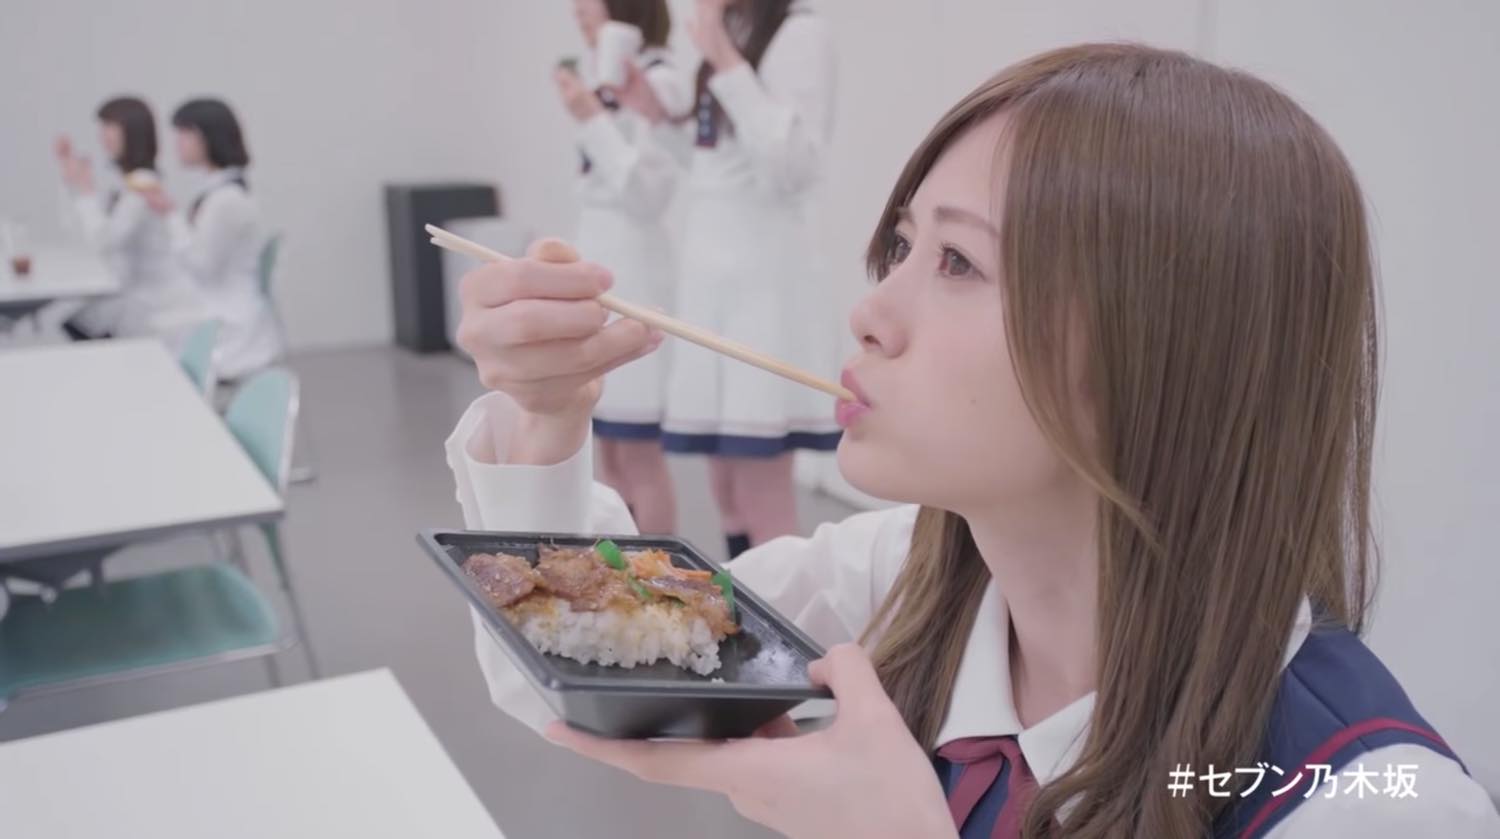 Nogizaka46 Stay Perfectly Still in 7-Eleven Mannequin Challenge Video!